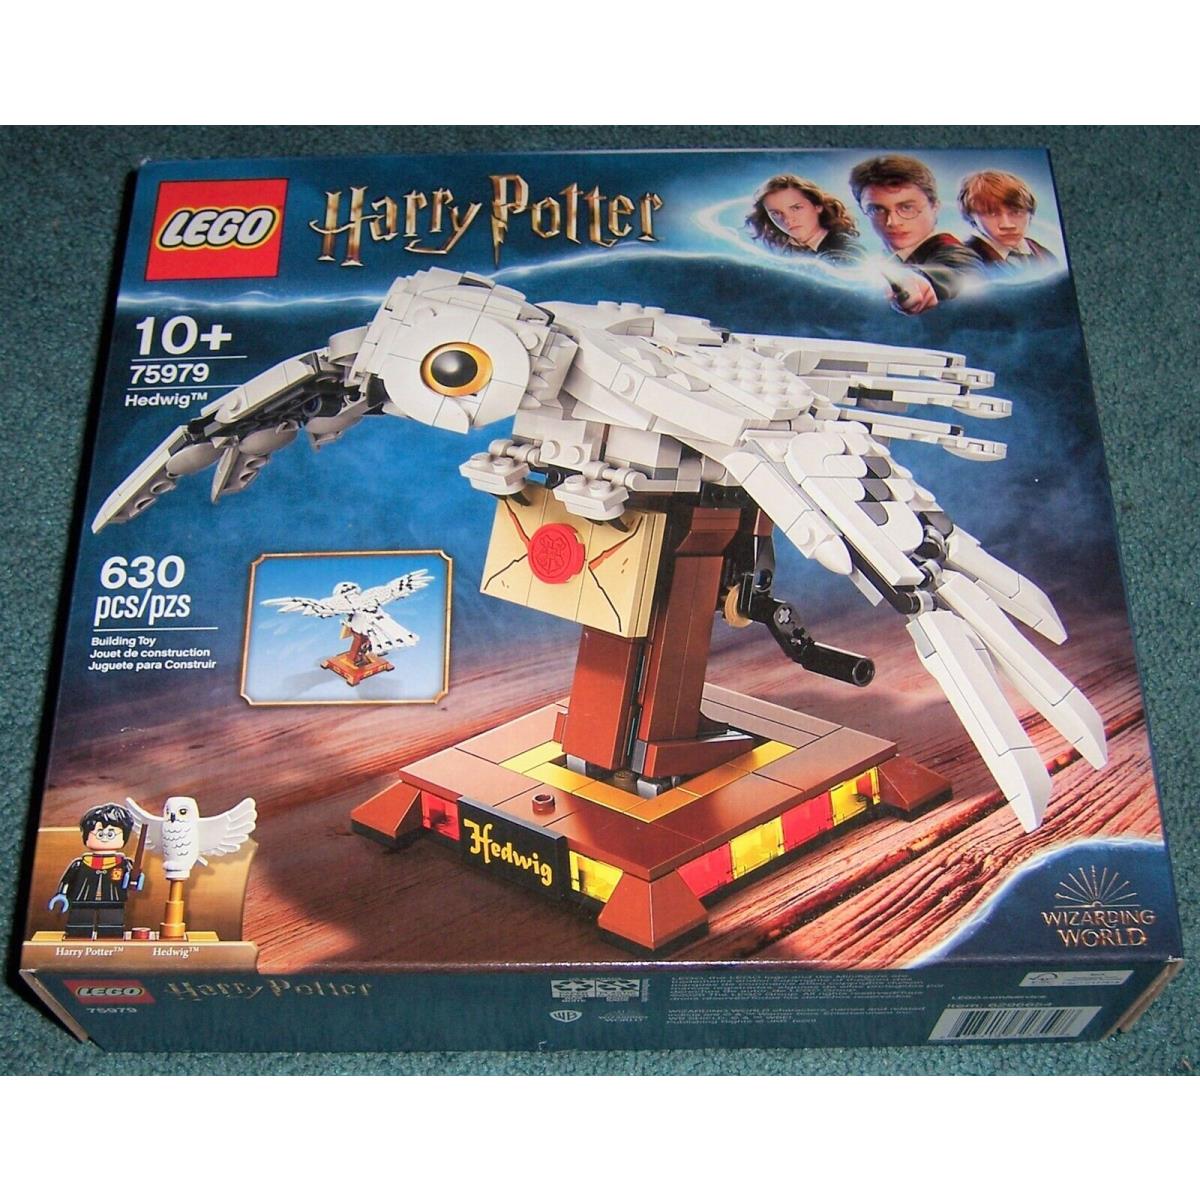 Lego Harry Potter Hedwig 75979 Building Set Owl with Flying` Wings 630 Pcs